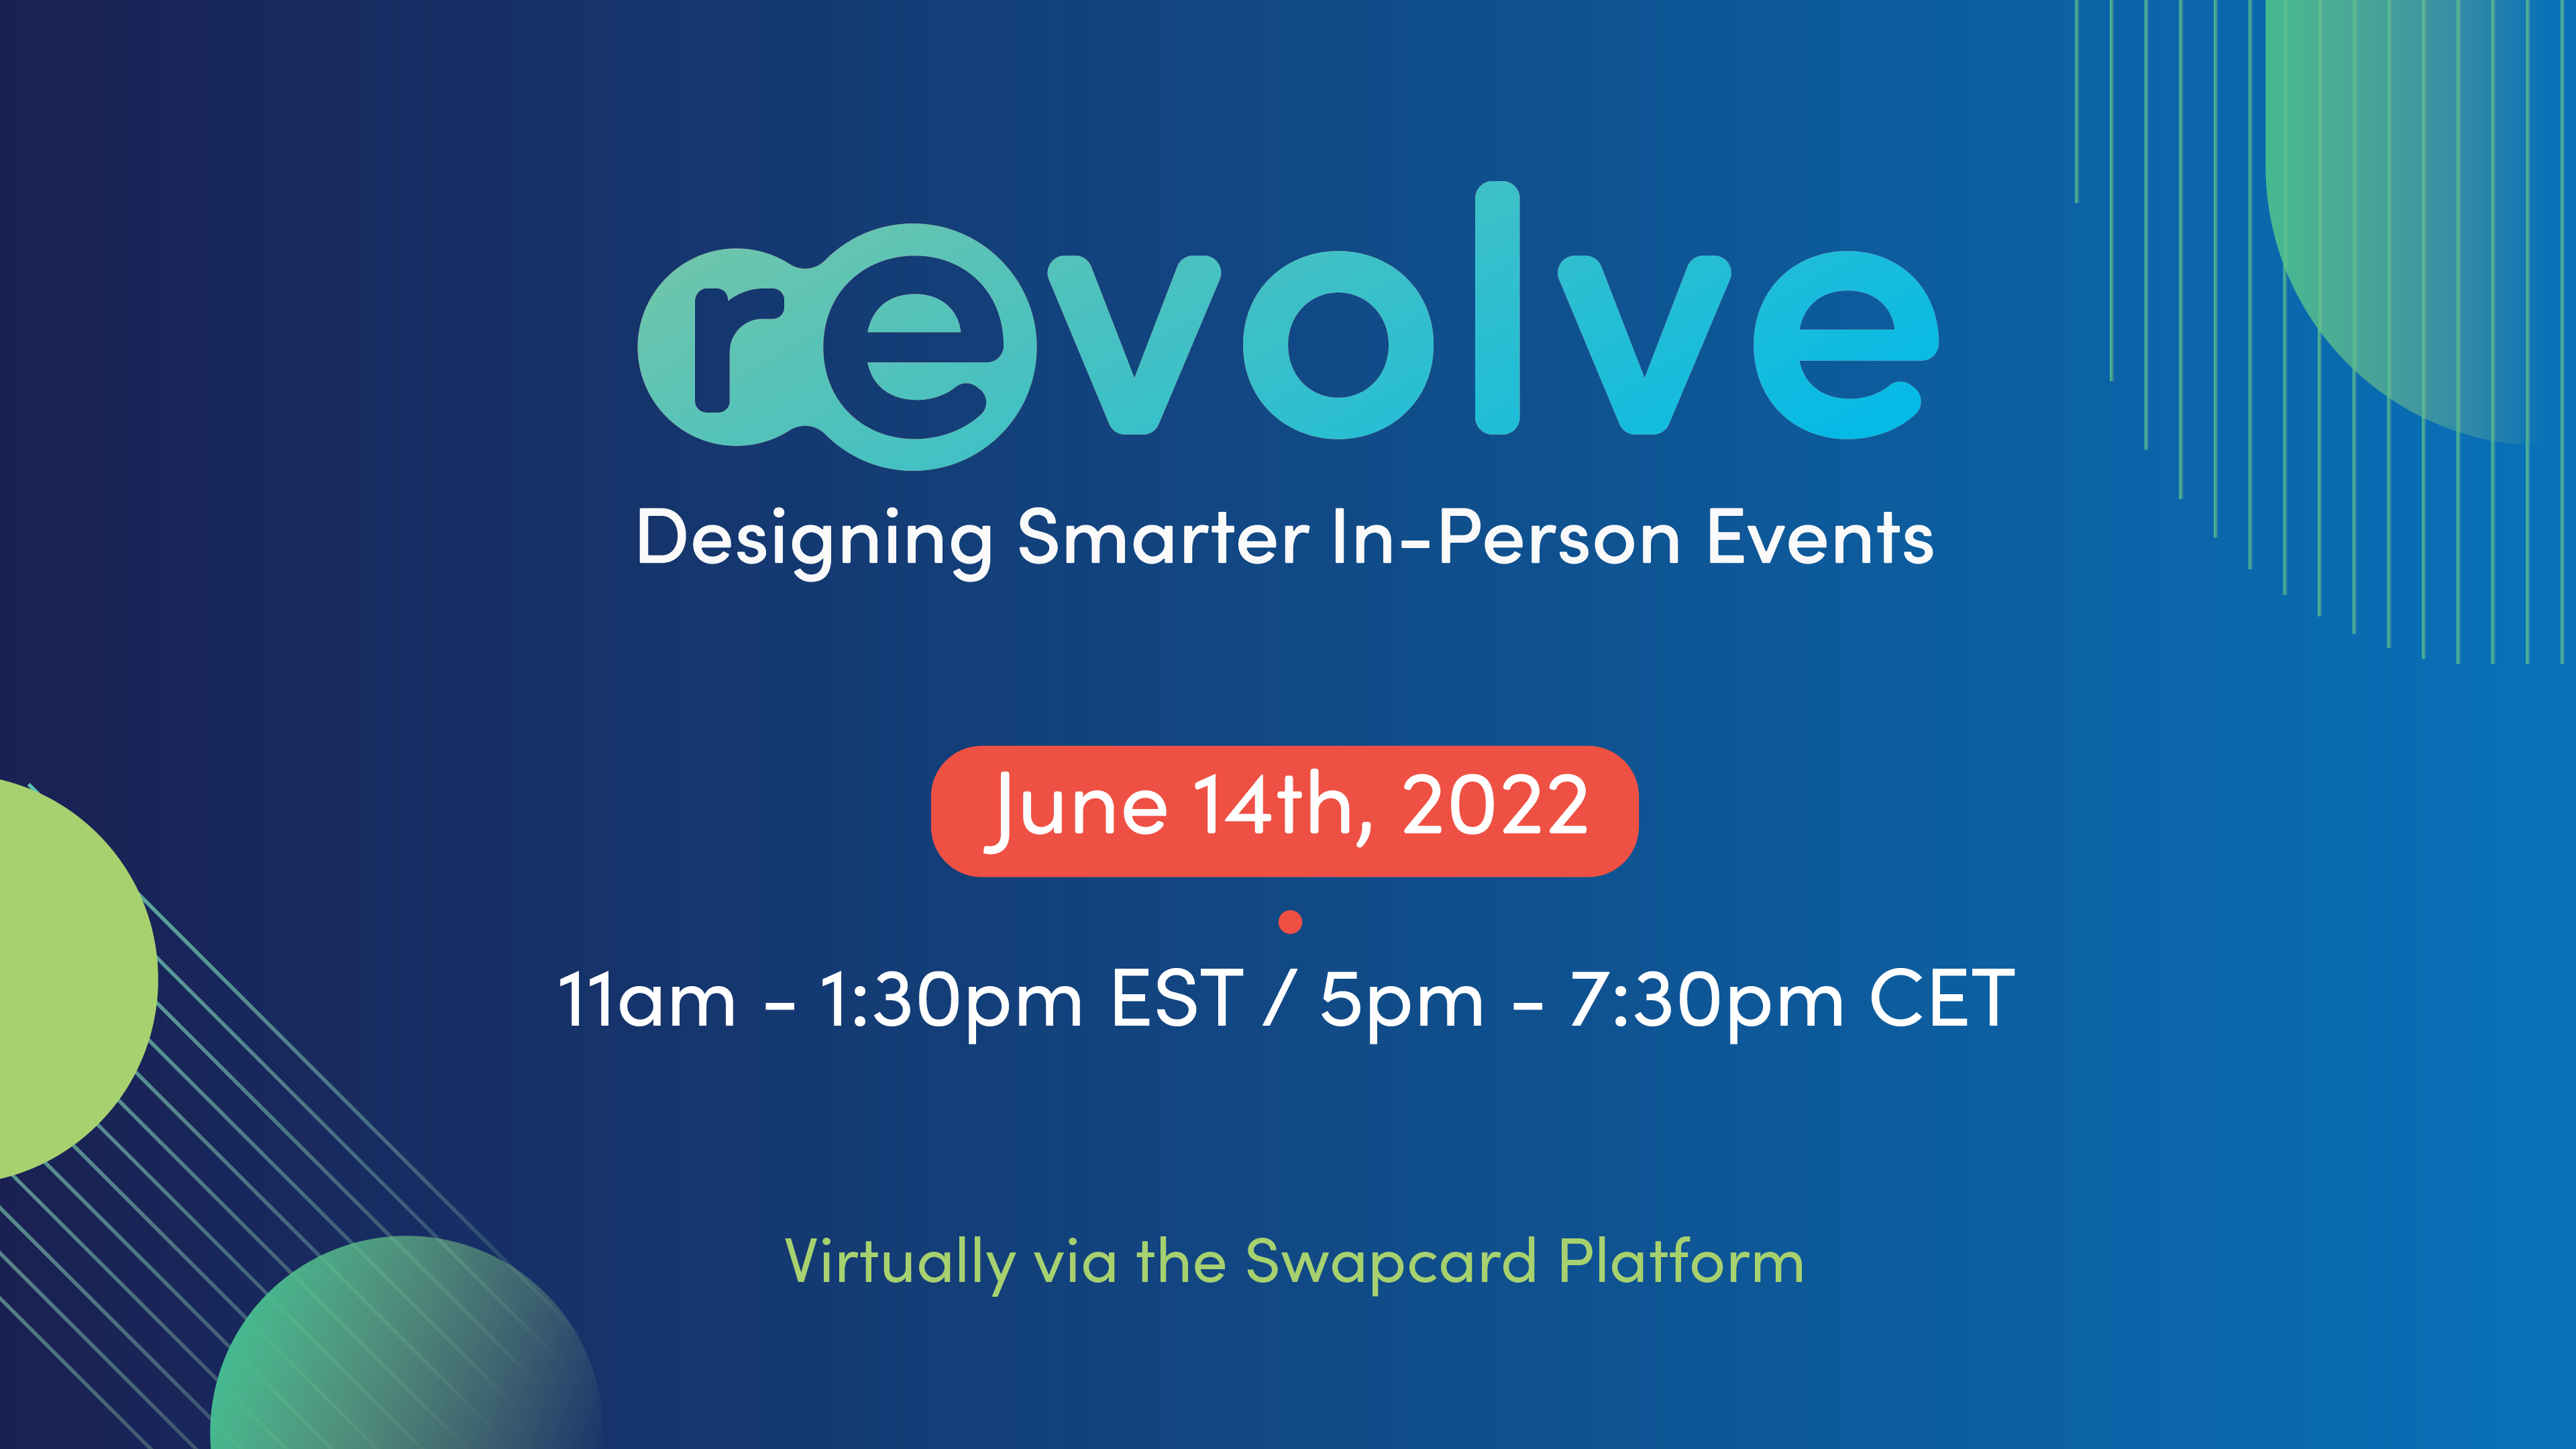 5 Reasons to Attend REvolve: Designing Smarter Events on June 14th